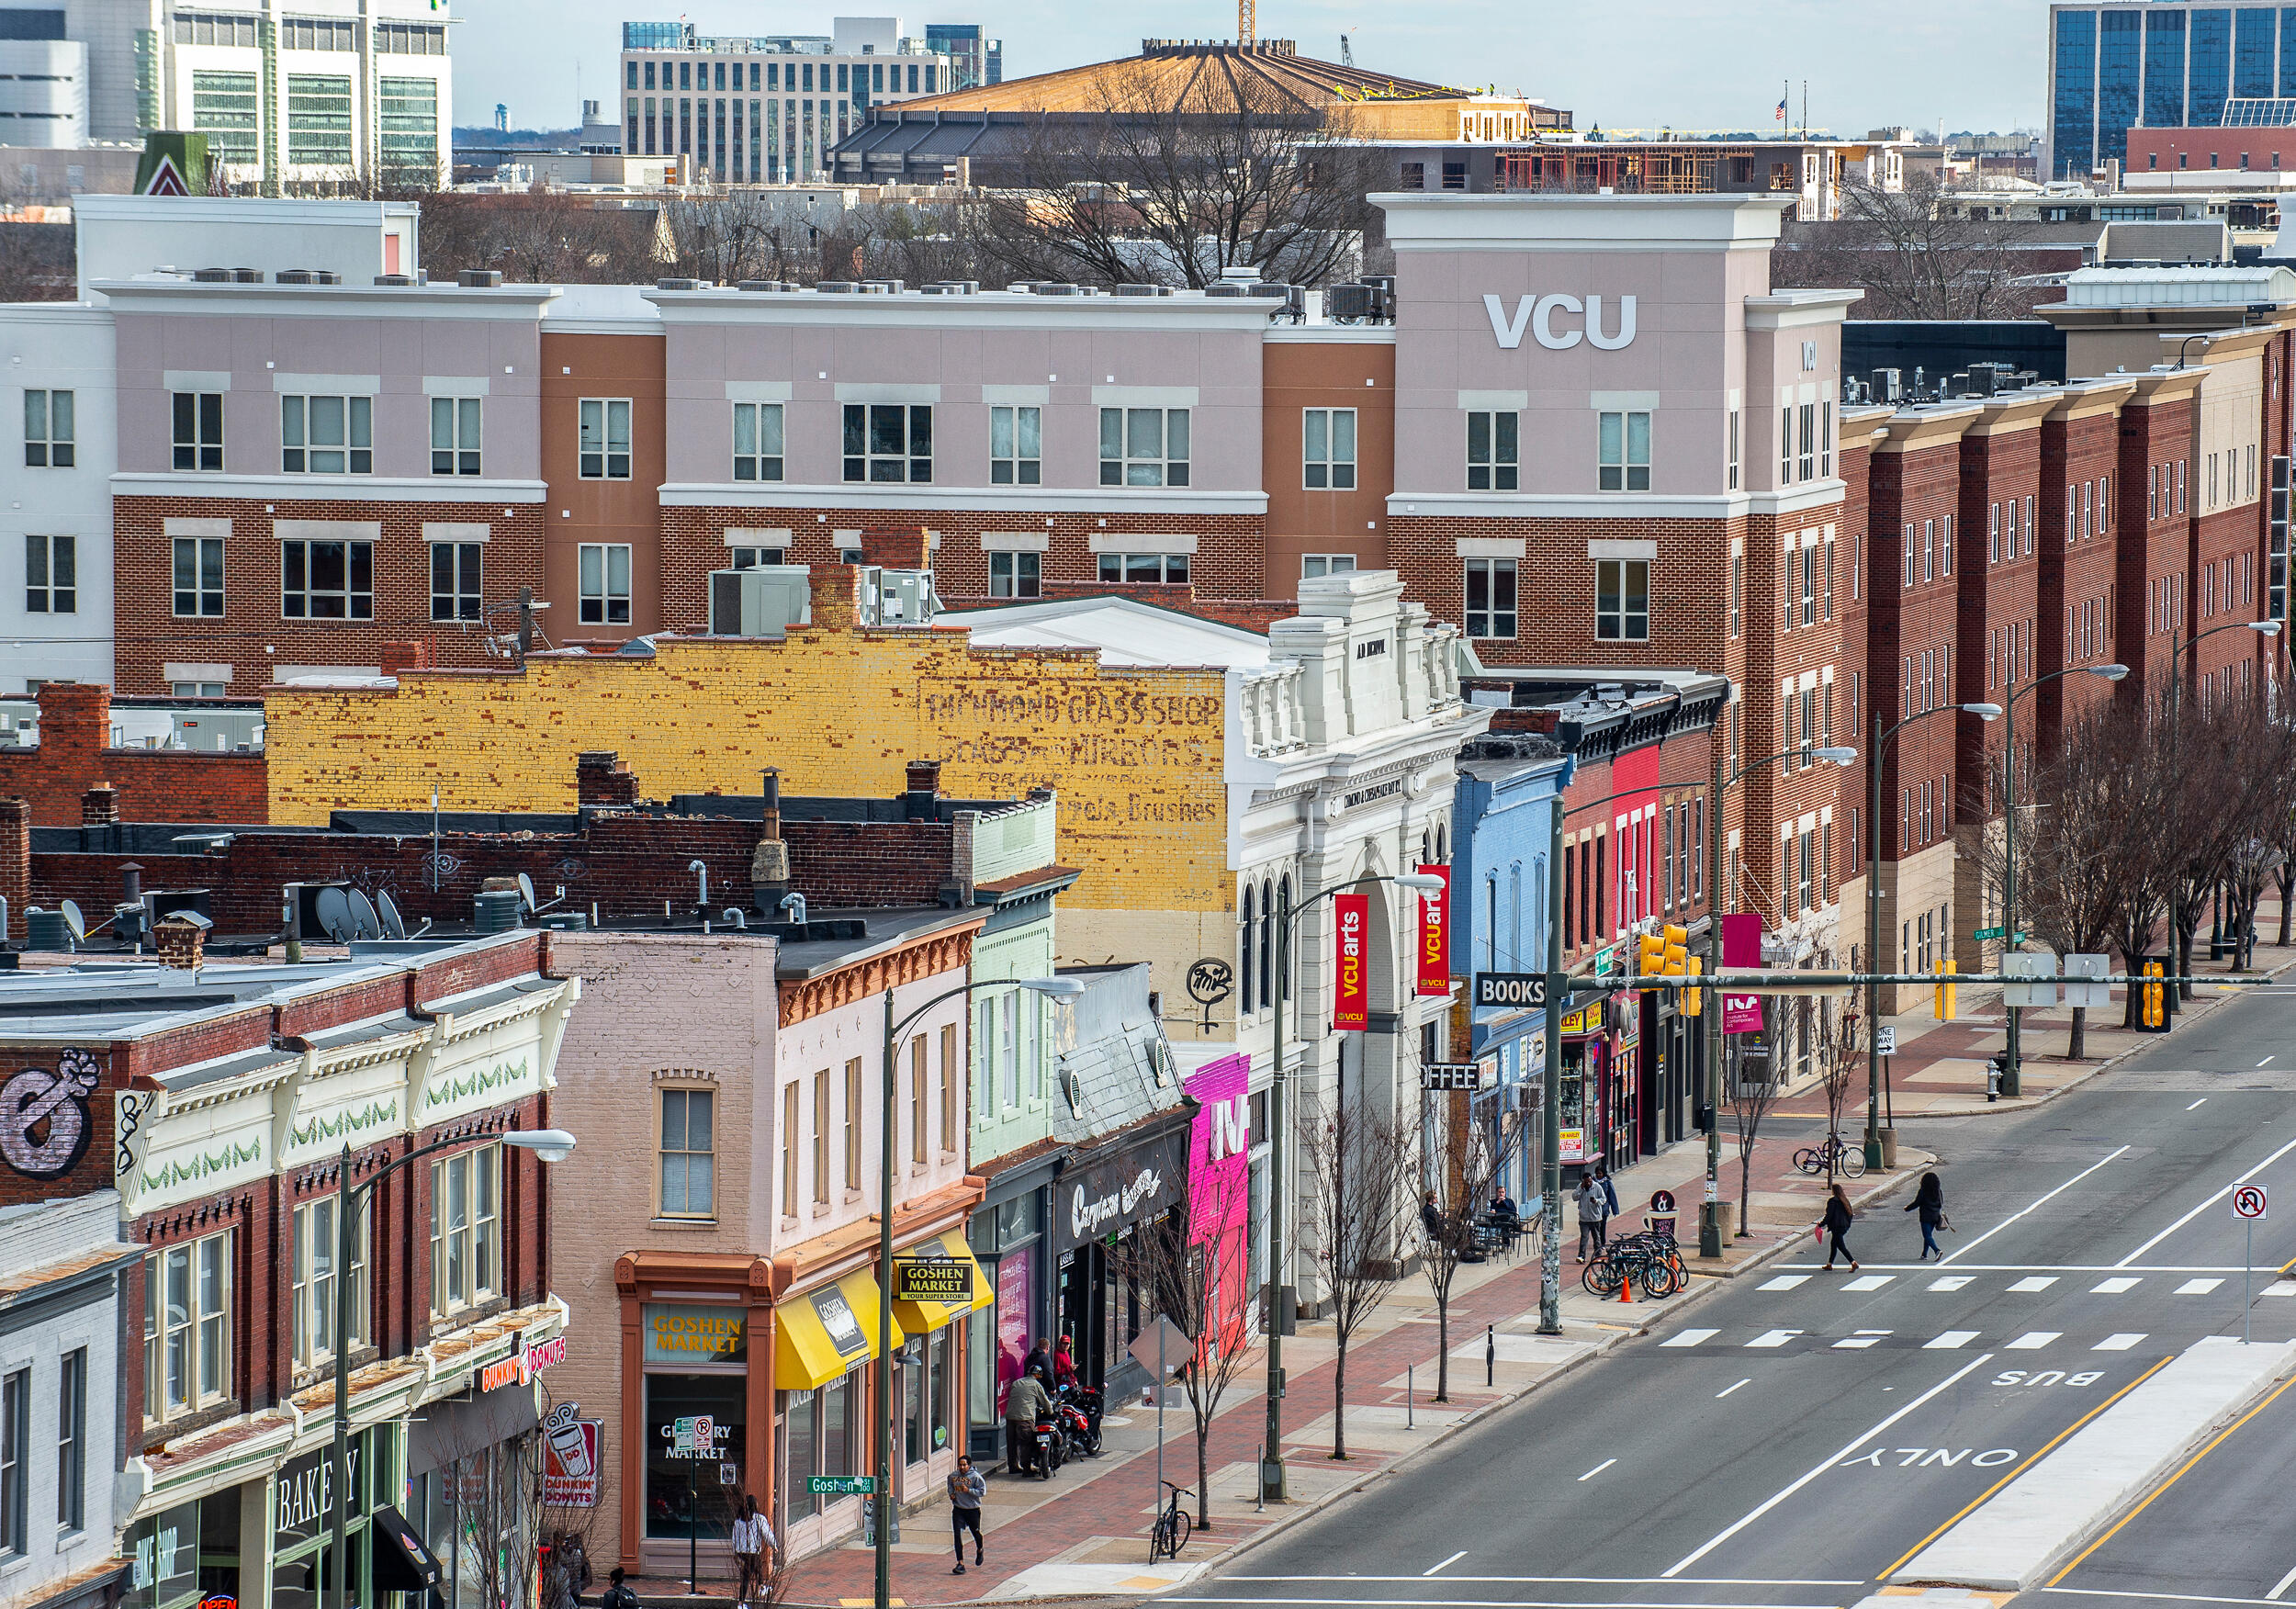 An aerial of a four-lane city street lined with colorful buildings and new apartments, including a VCU building.